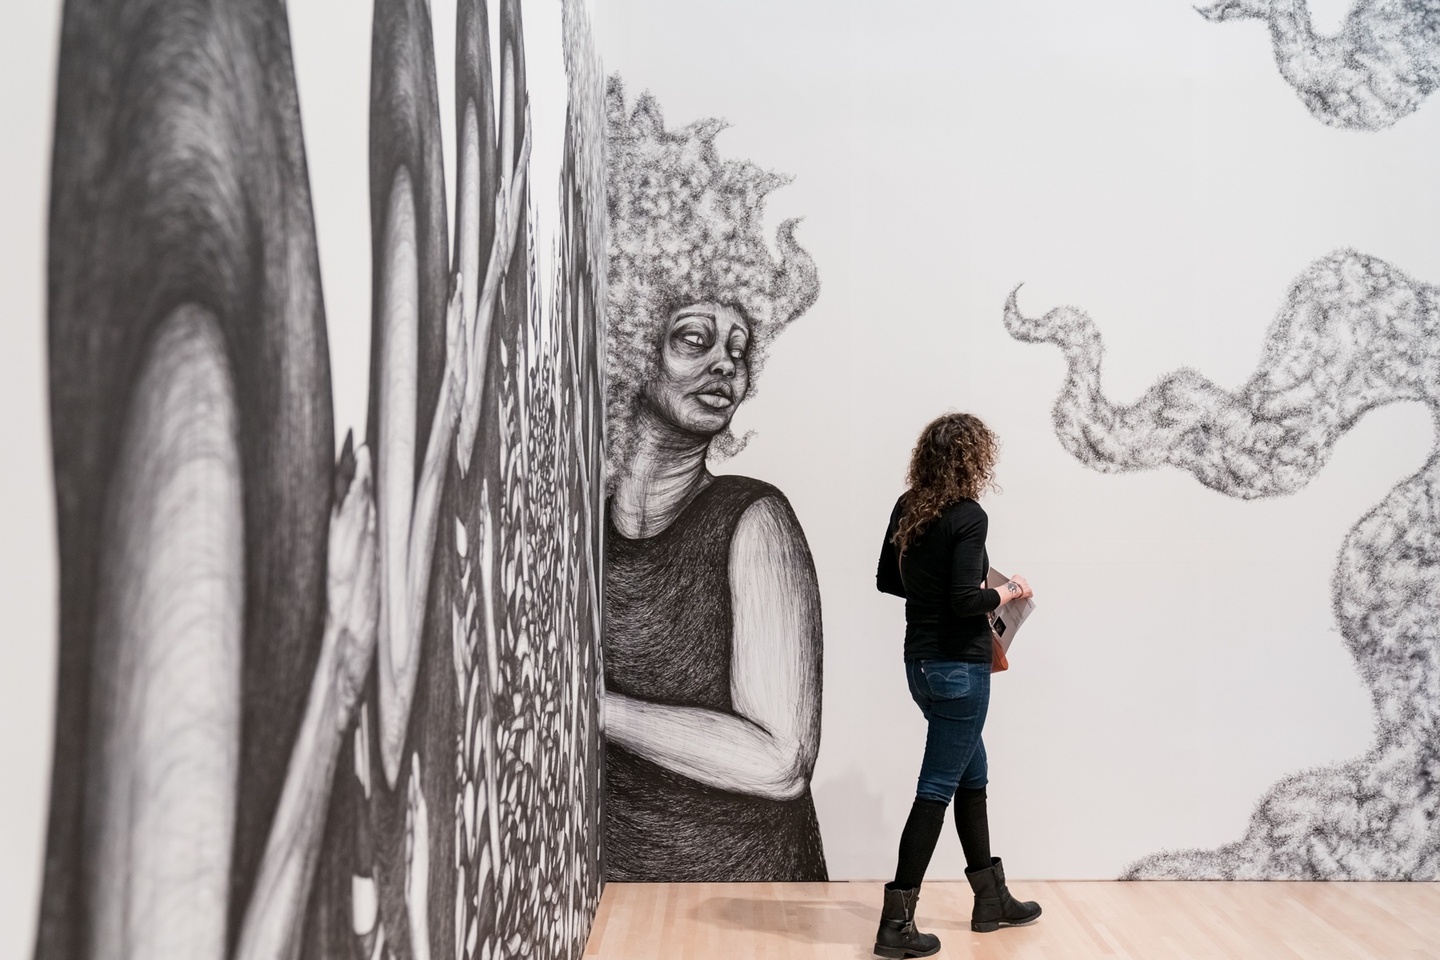 Gallery viewer observes the detail of the ballpoint pen larger than life drawing of a figure with hair and clouds with similar hair visual